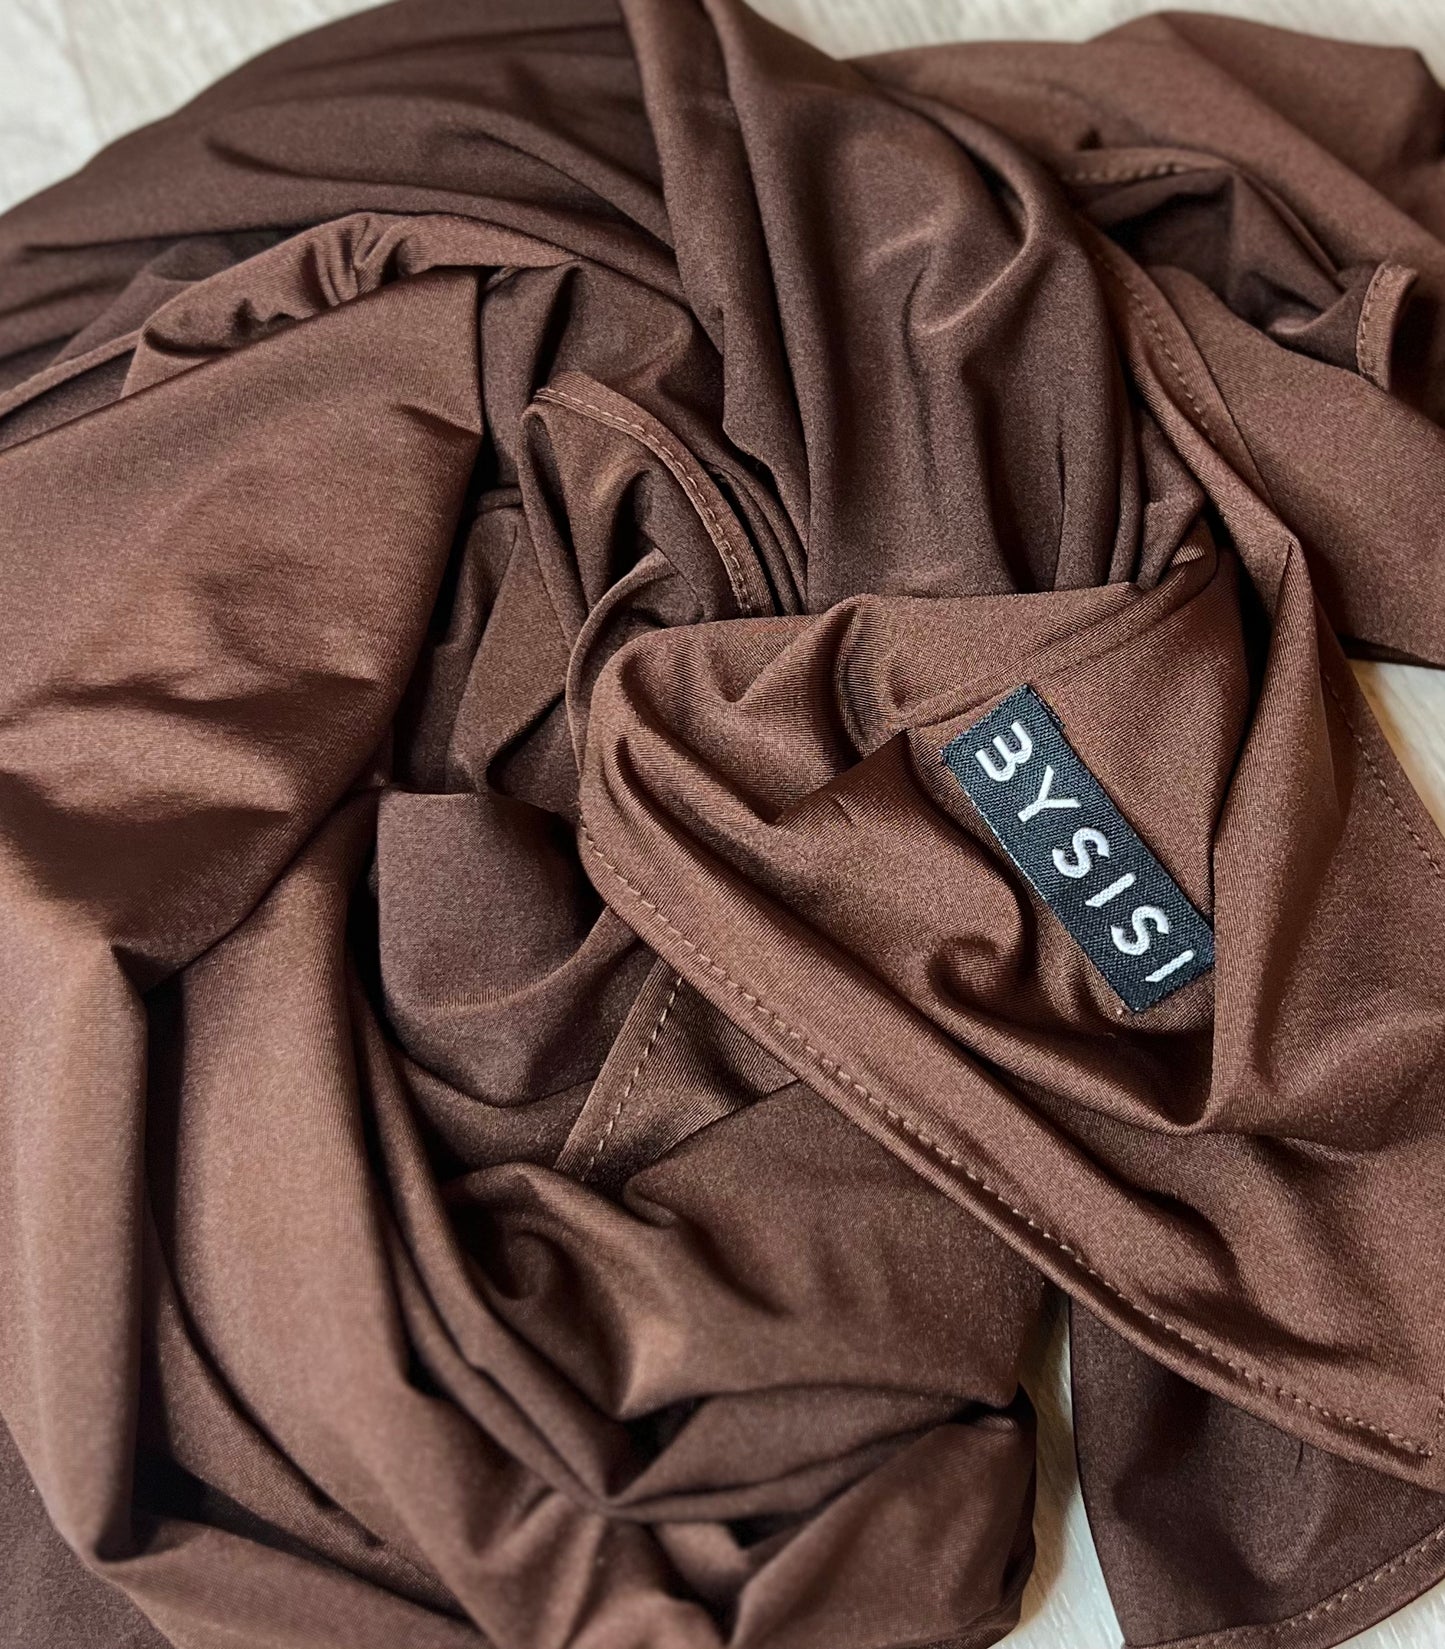 Satin Jersey in Chocolate - BYSISI